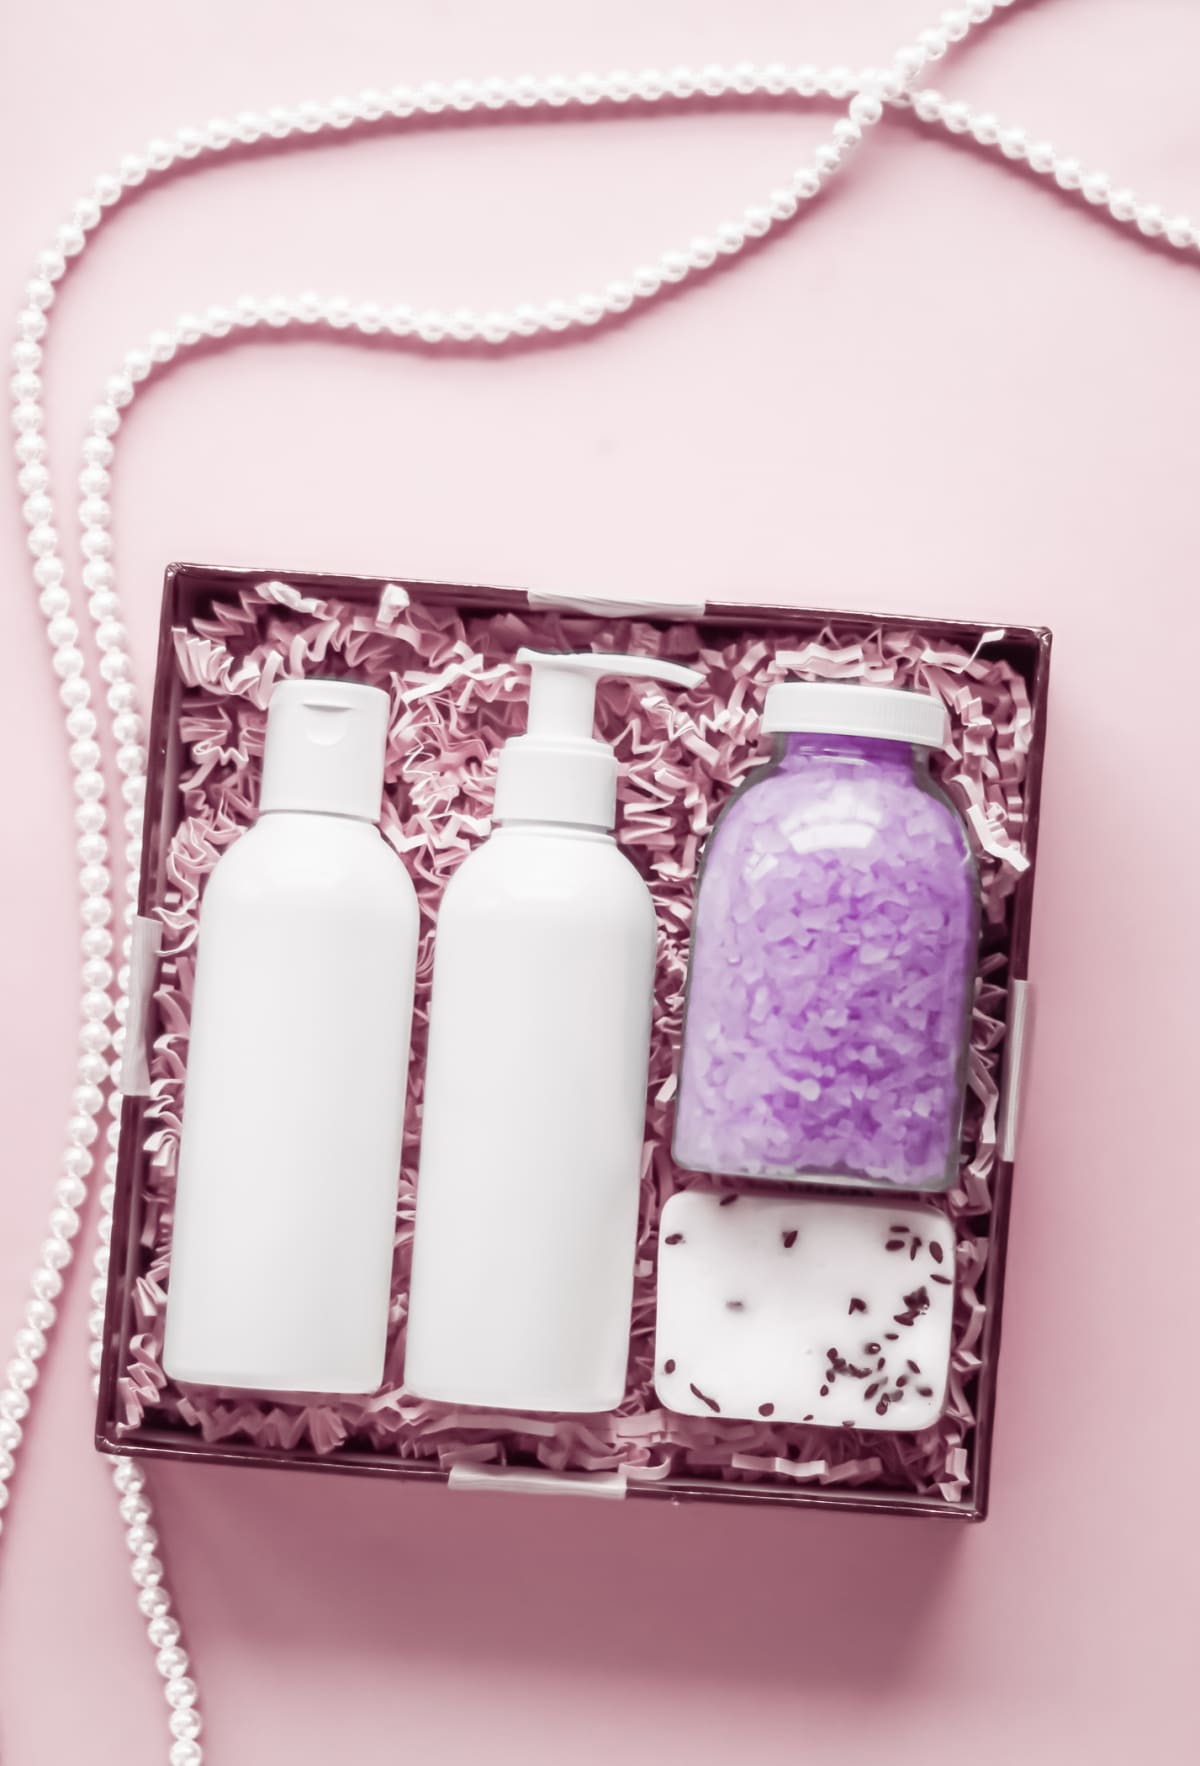 Shampoo, conditioner, soap, and bath salts in a box with pink decor